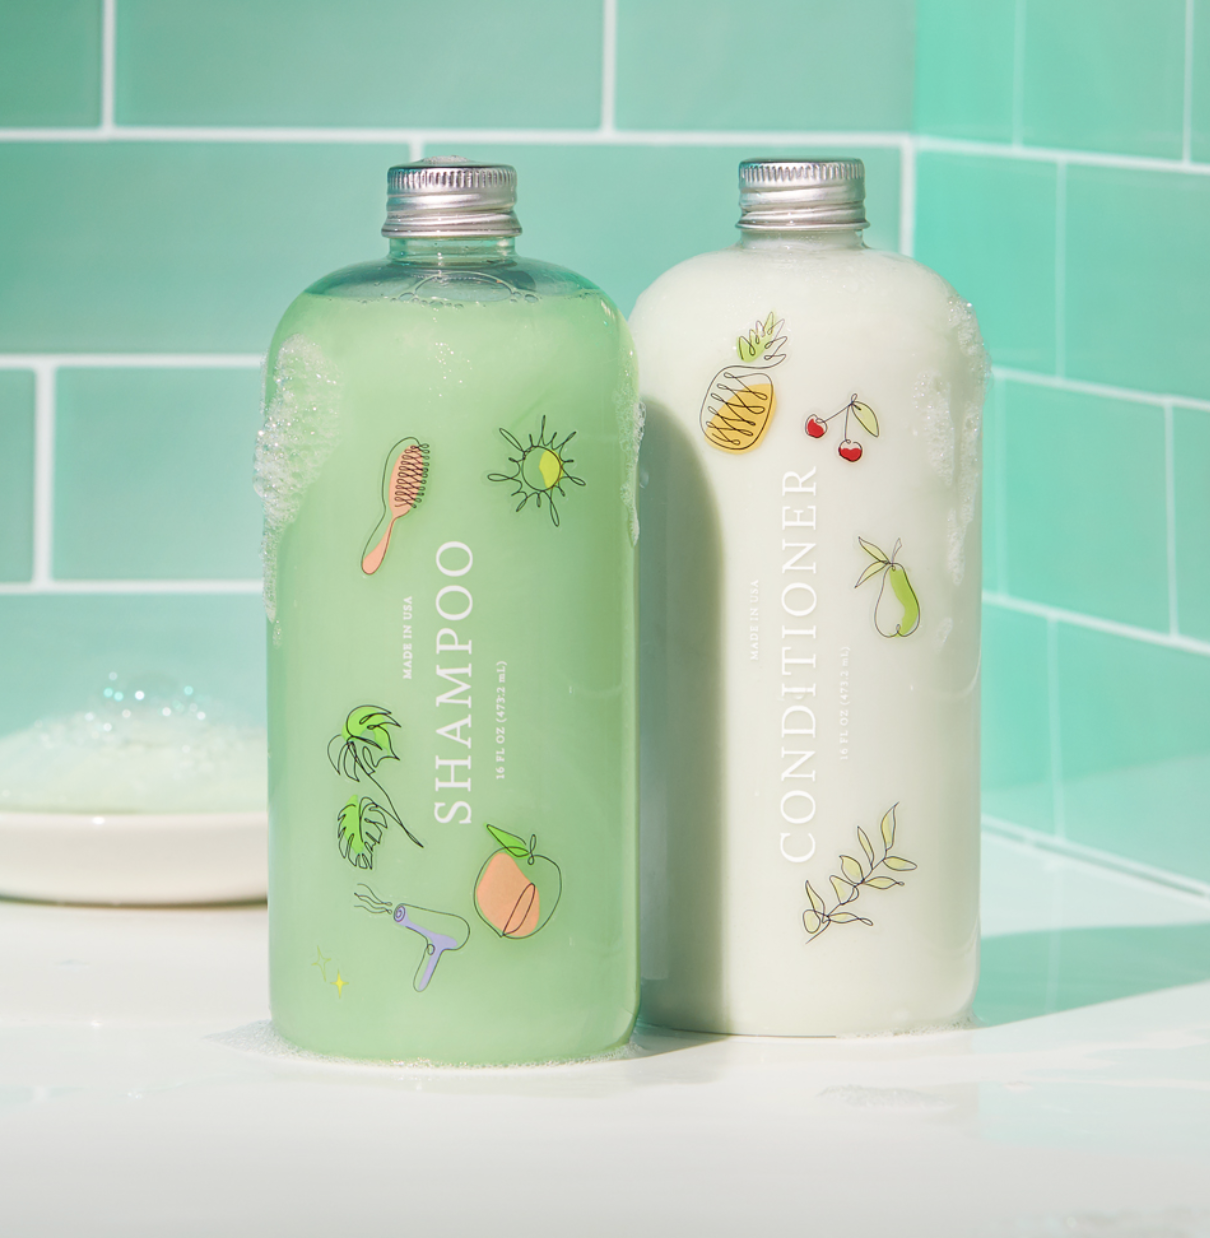 the shampoo and conditioner in green and white